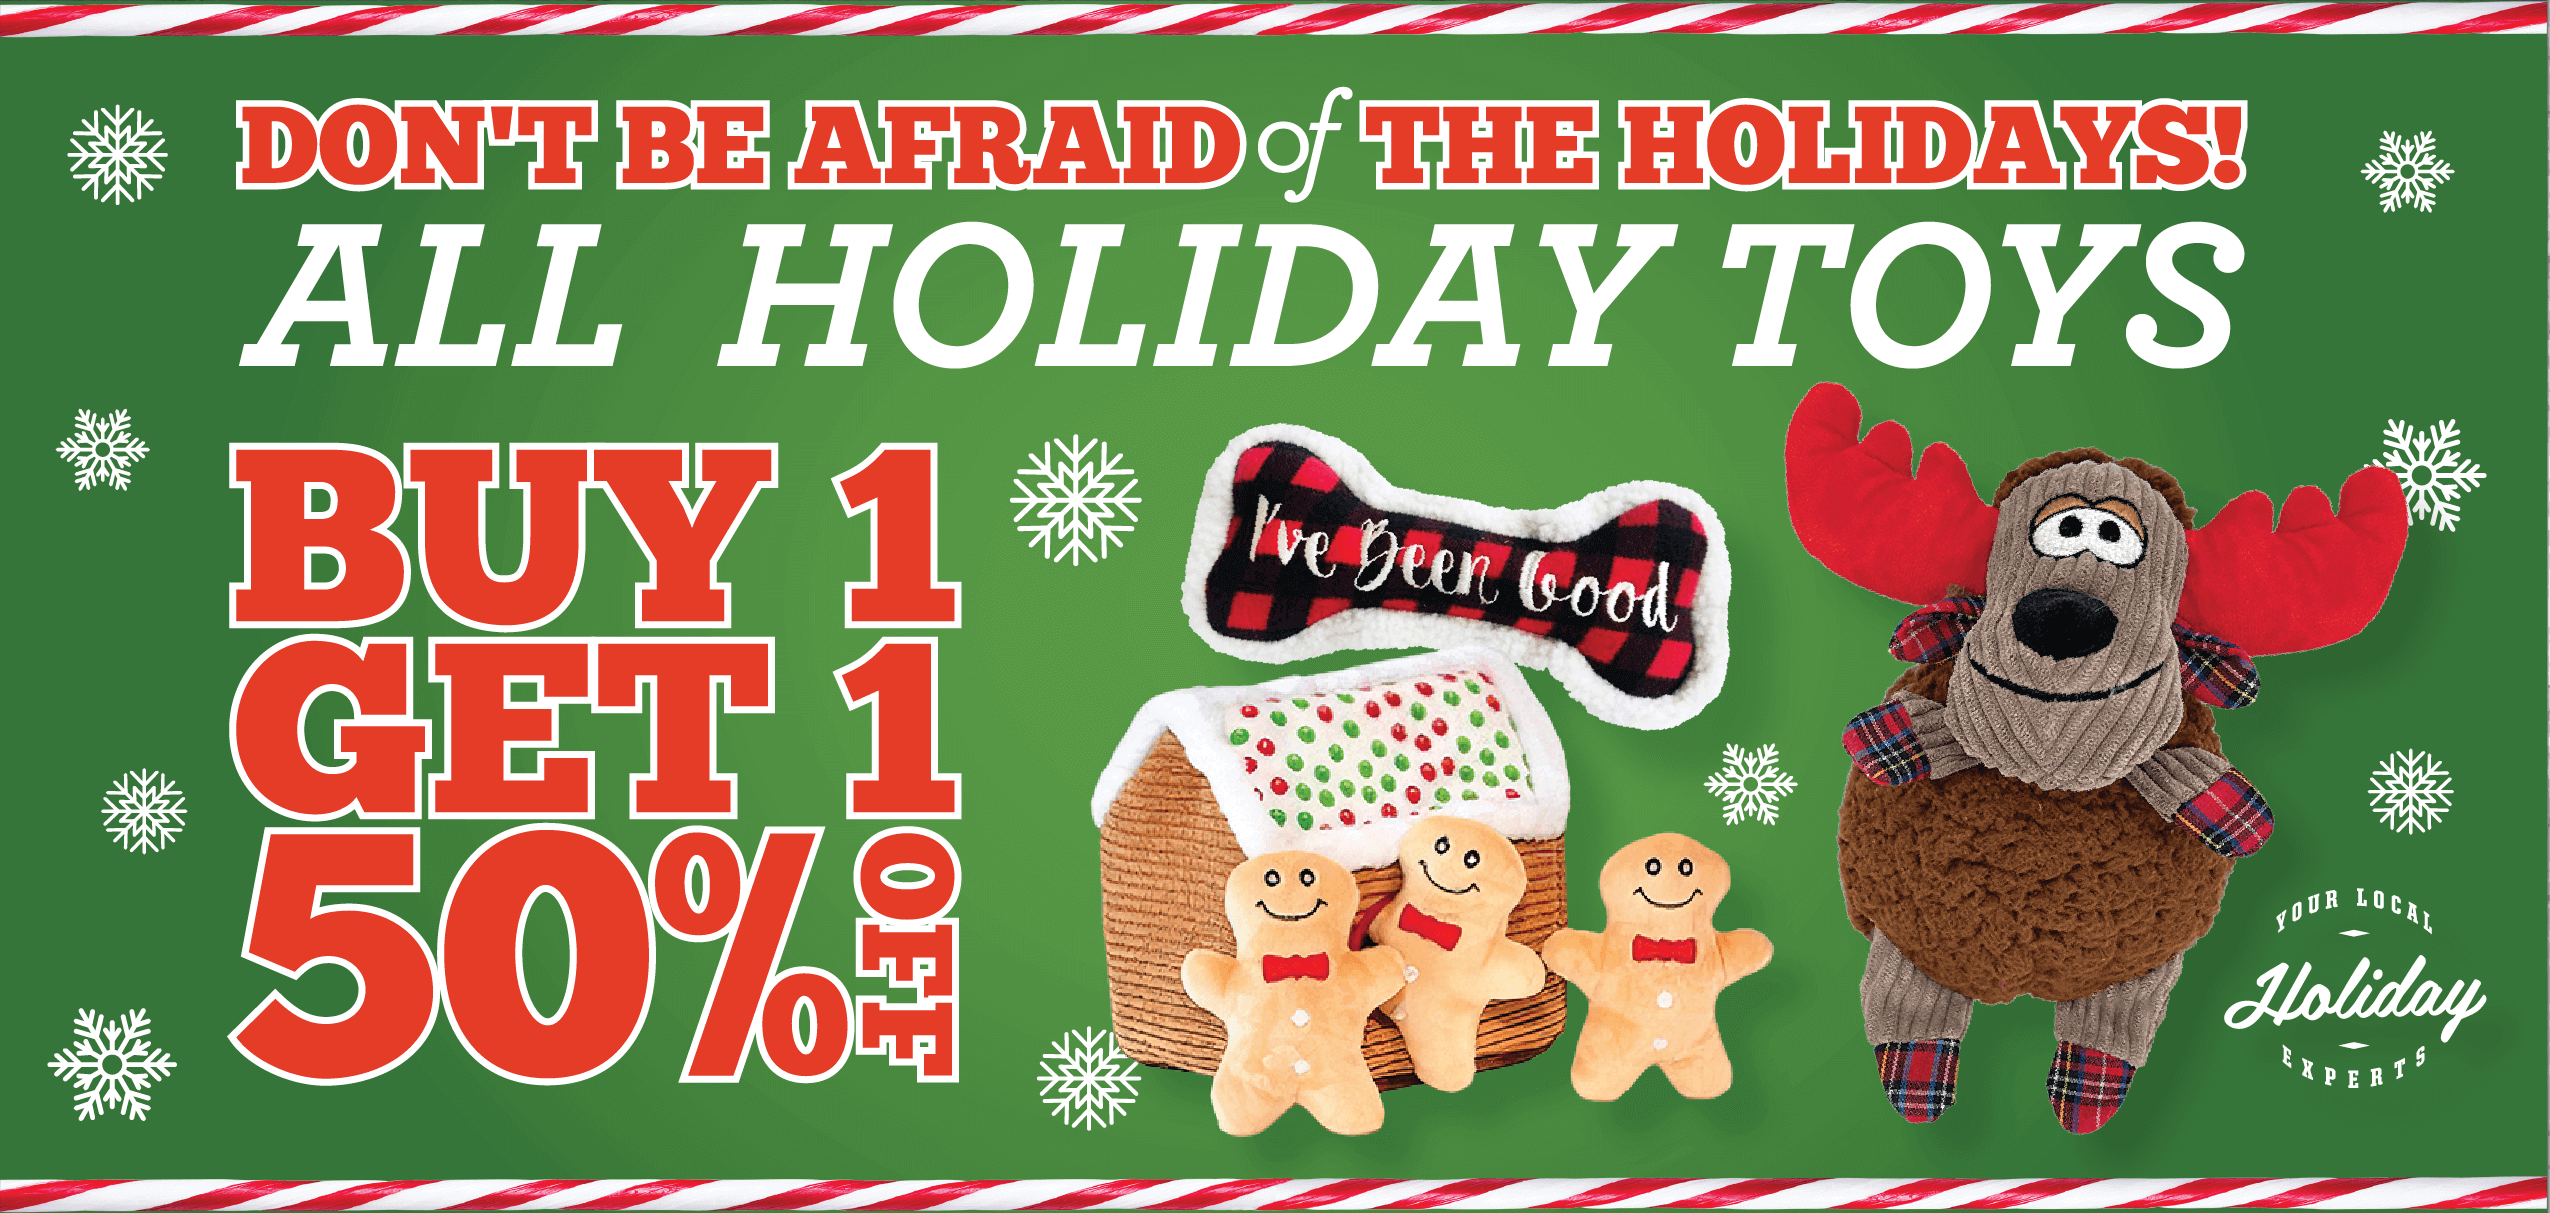 All Holiday Toys Buy, 1 Get 1 50% Off!